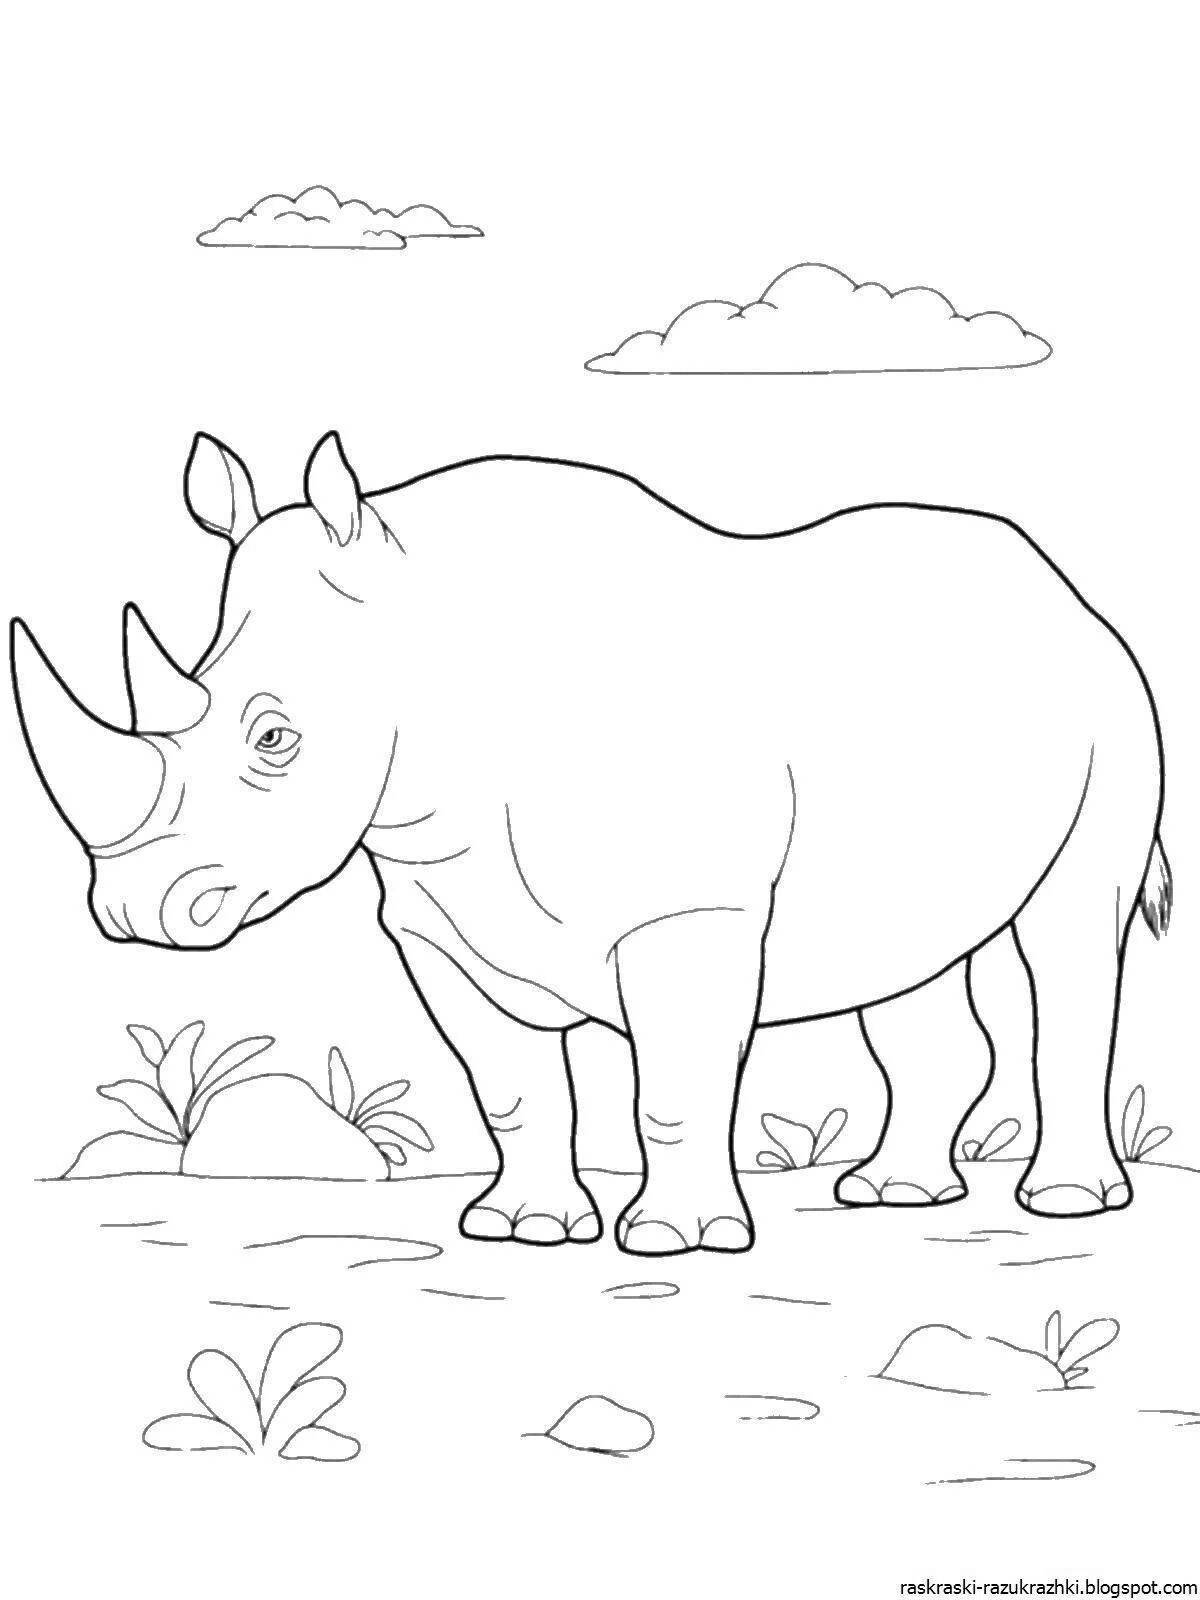 Amazing coloring pages animals of hot countries for children 5-6 years old